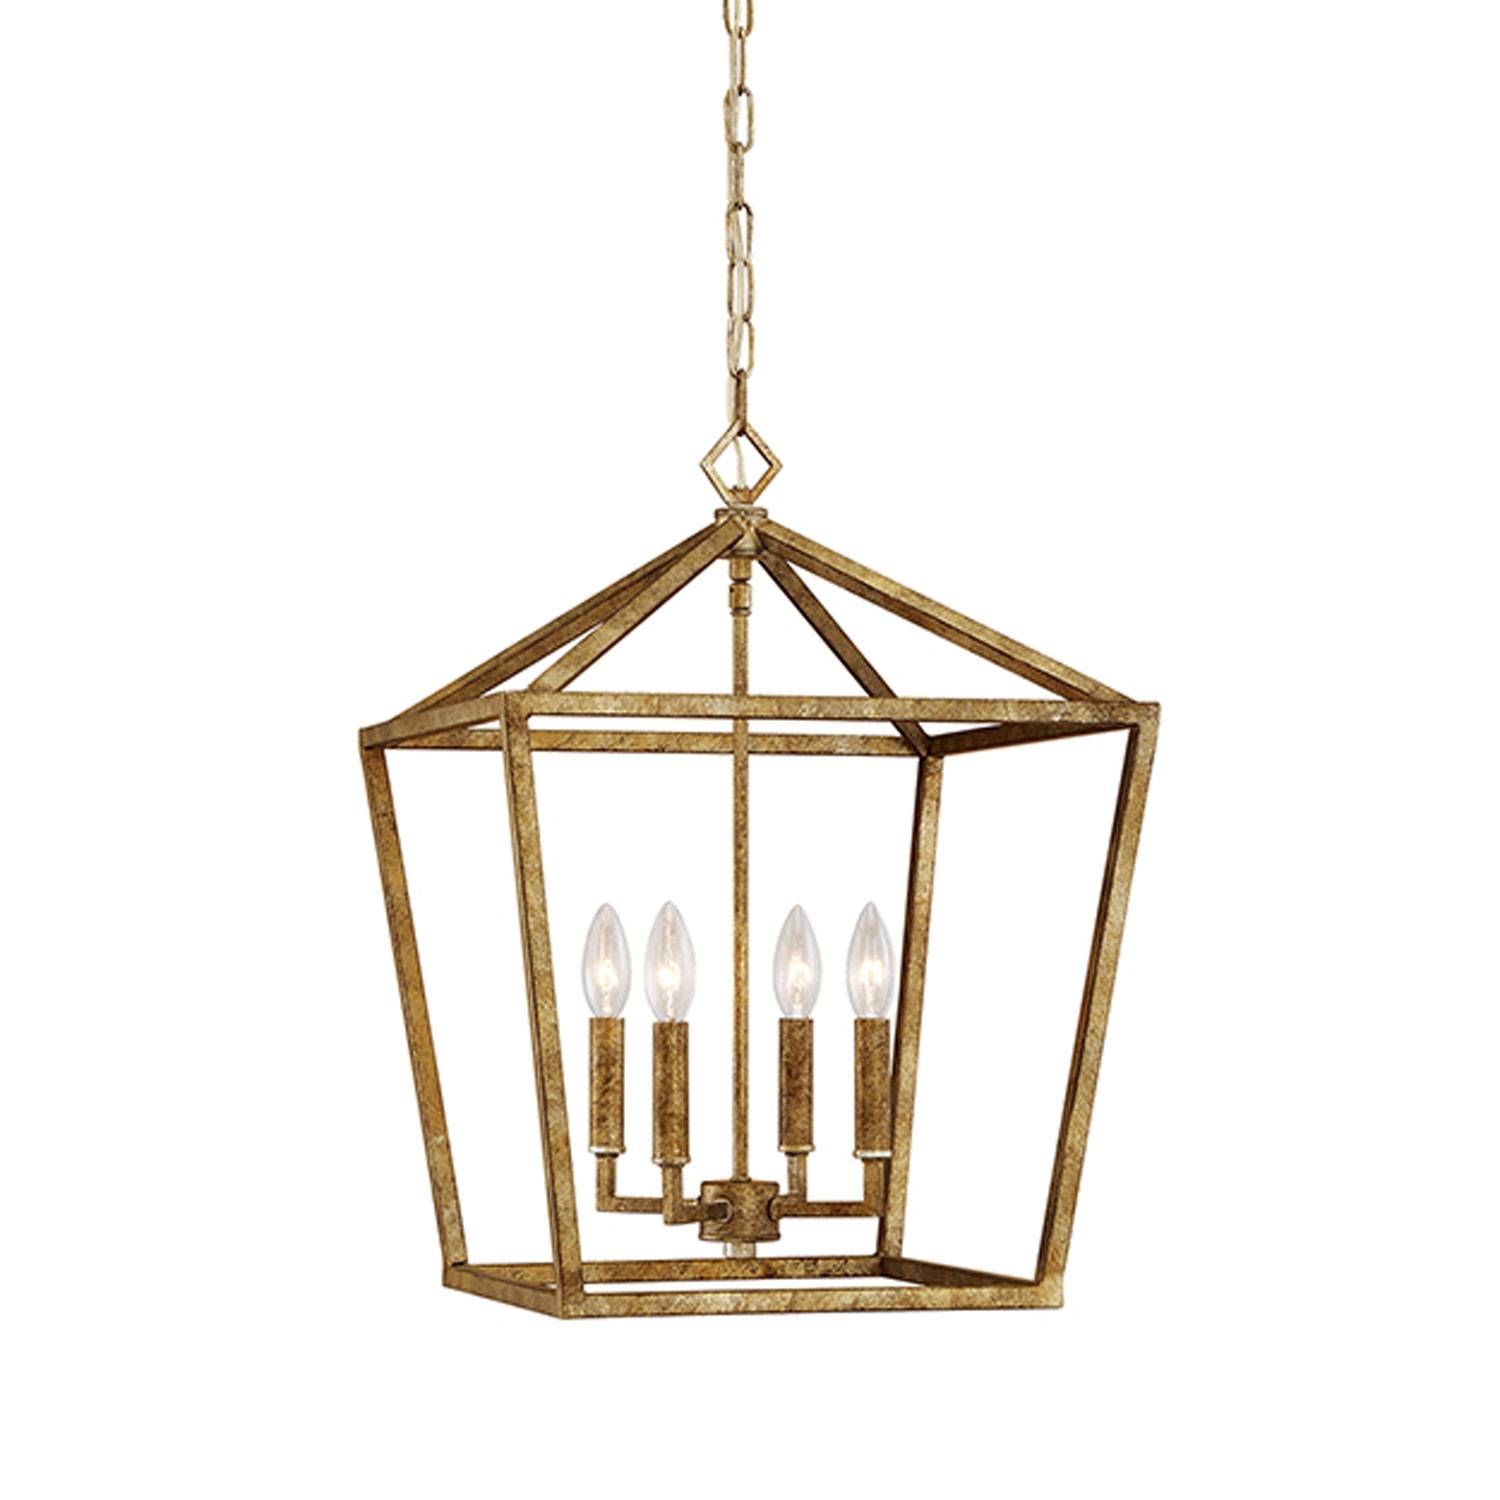 Bellacor Lantern Pendant Lighting Adds A Cheery Glow To Any Room Within Lantern Style Pendants (View 10 of 15)